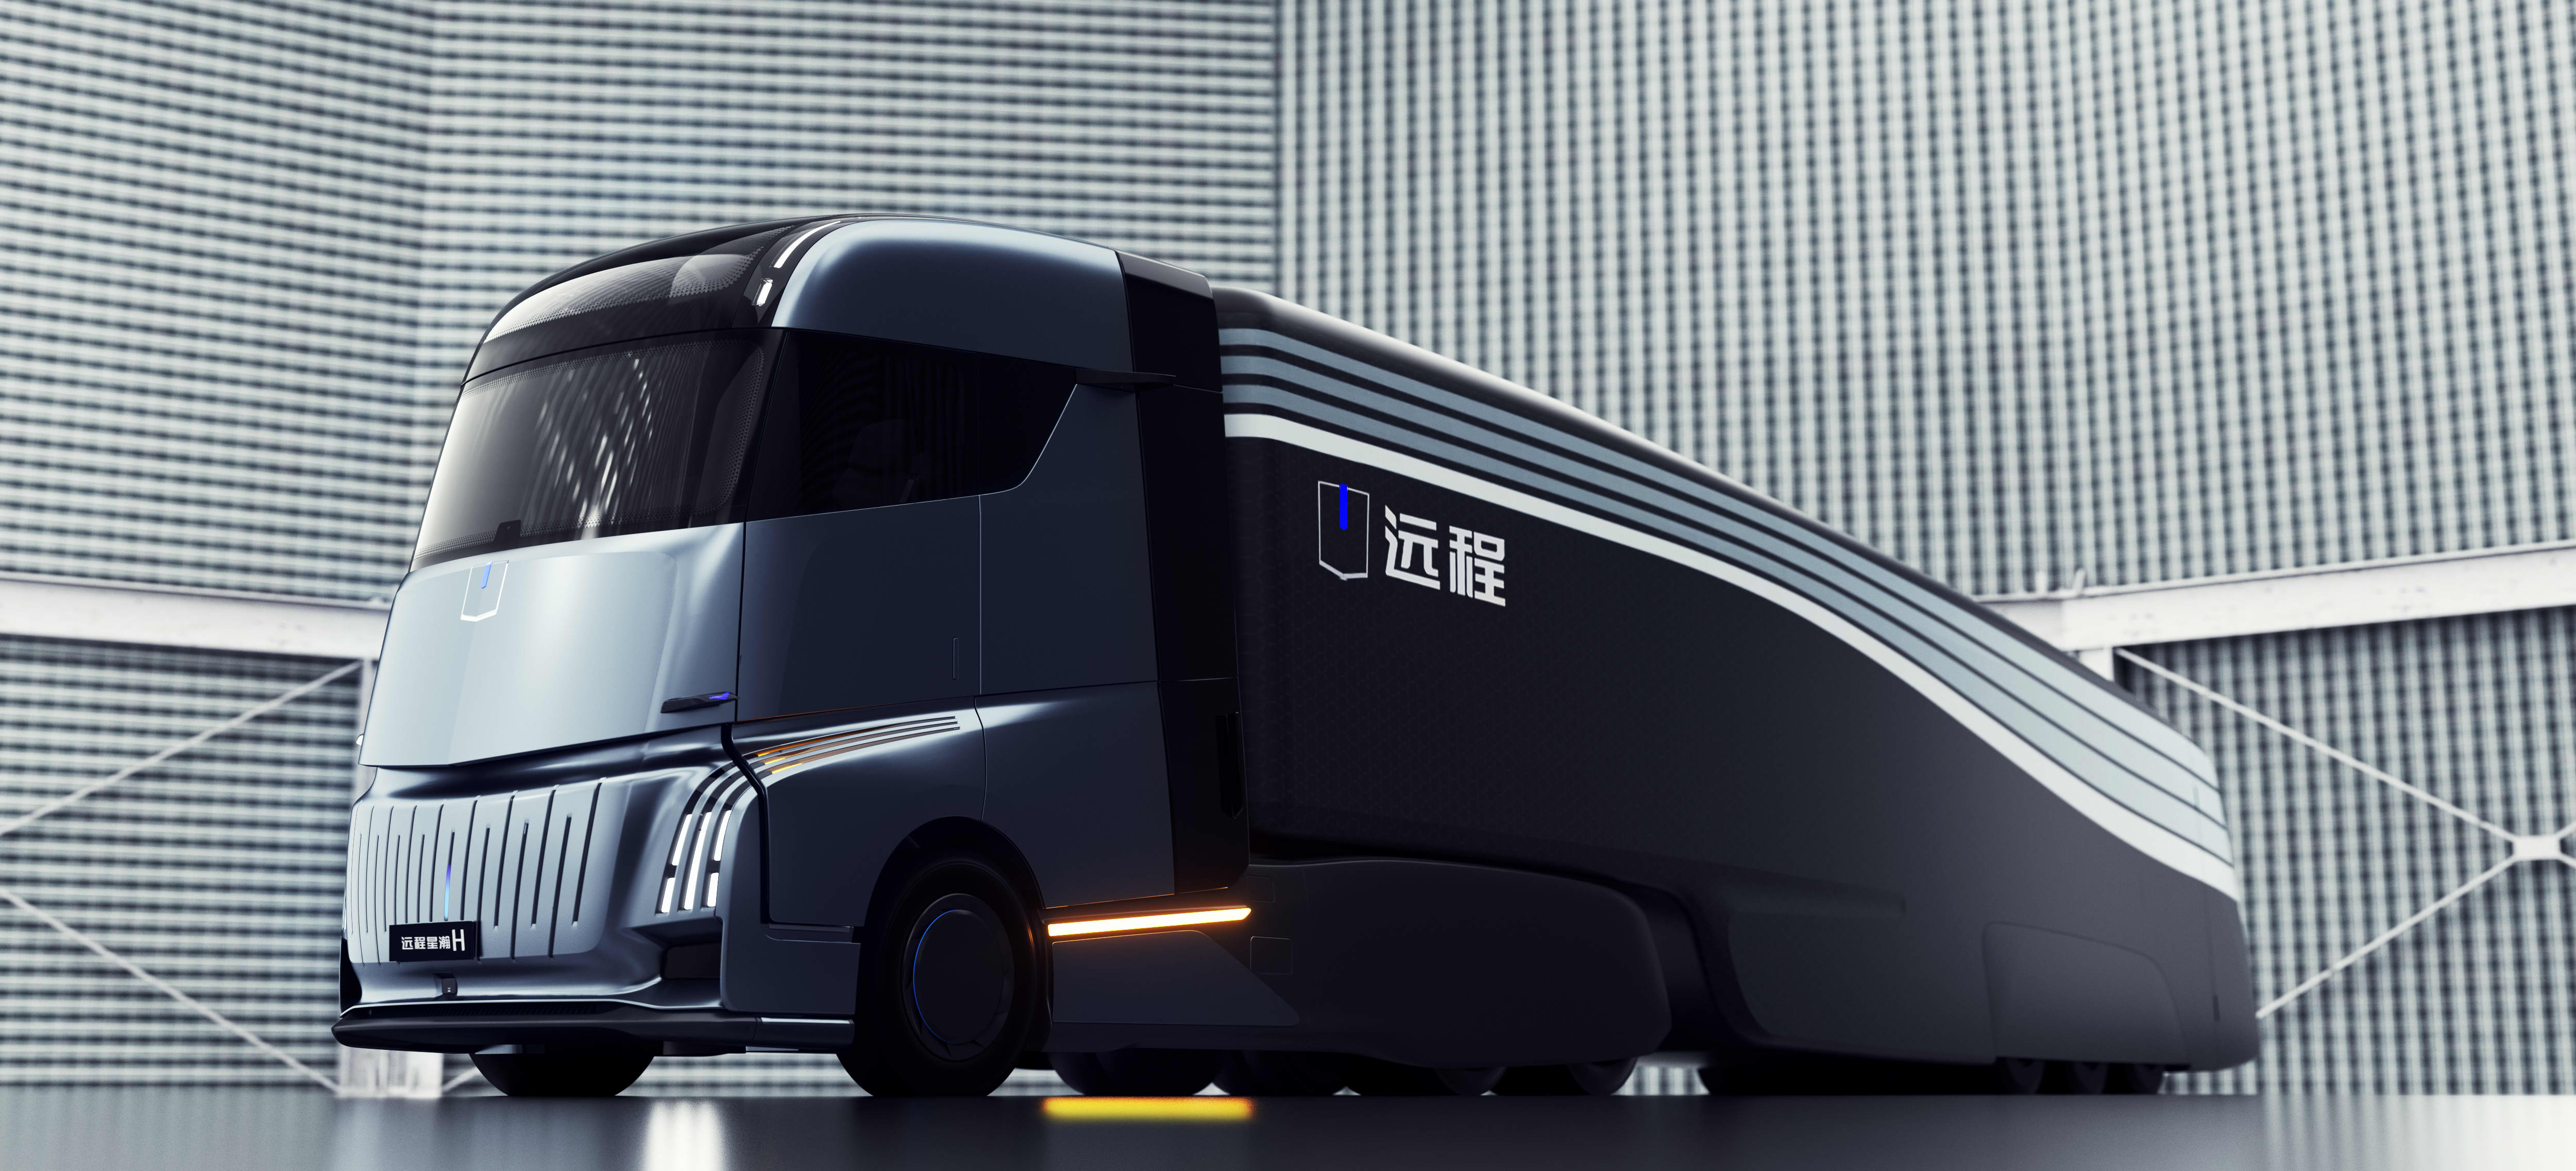 China’s Geely launches electric truck, rival to Tesla’s Semi